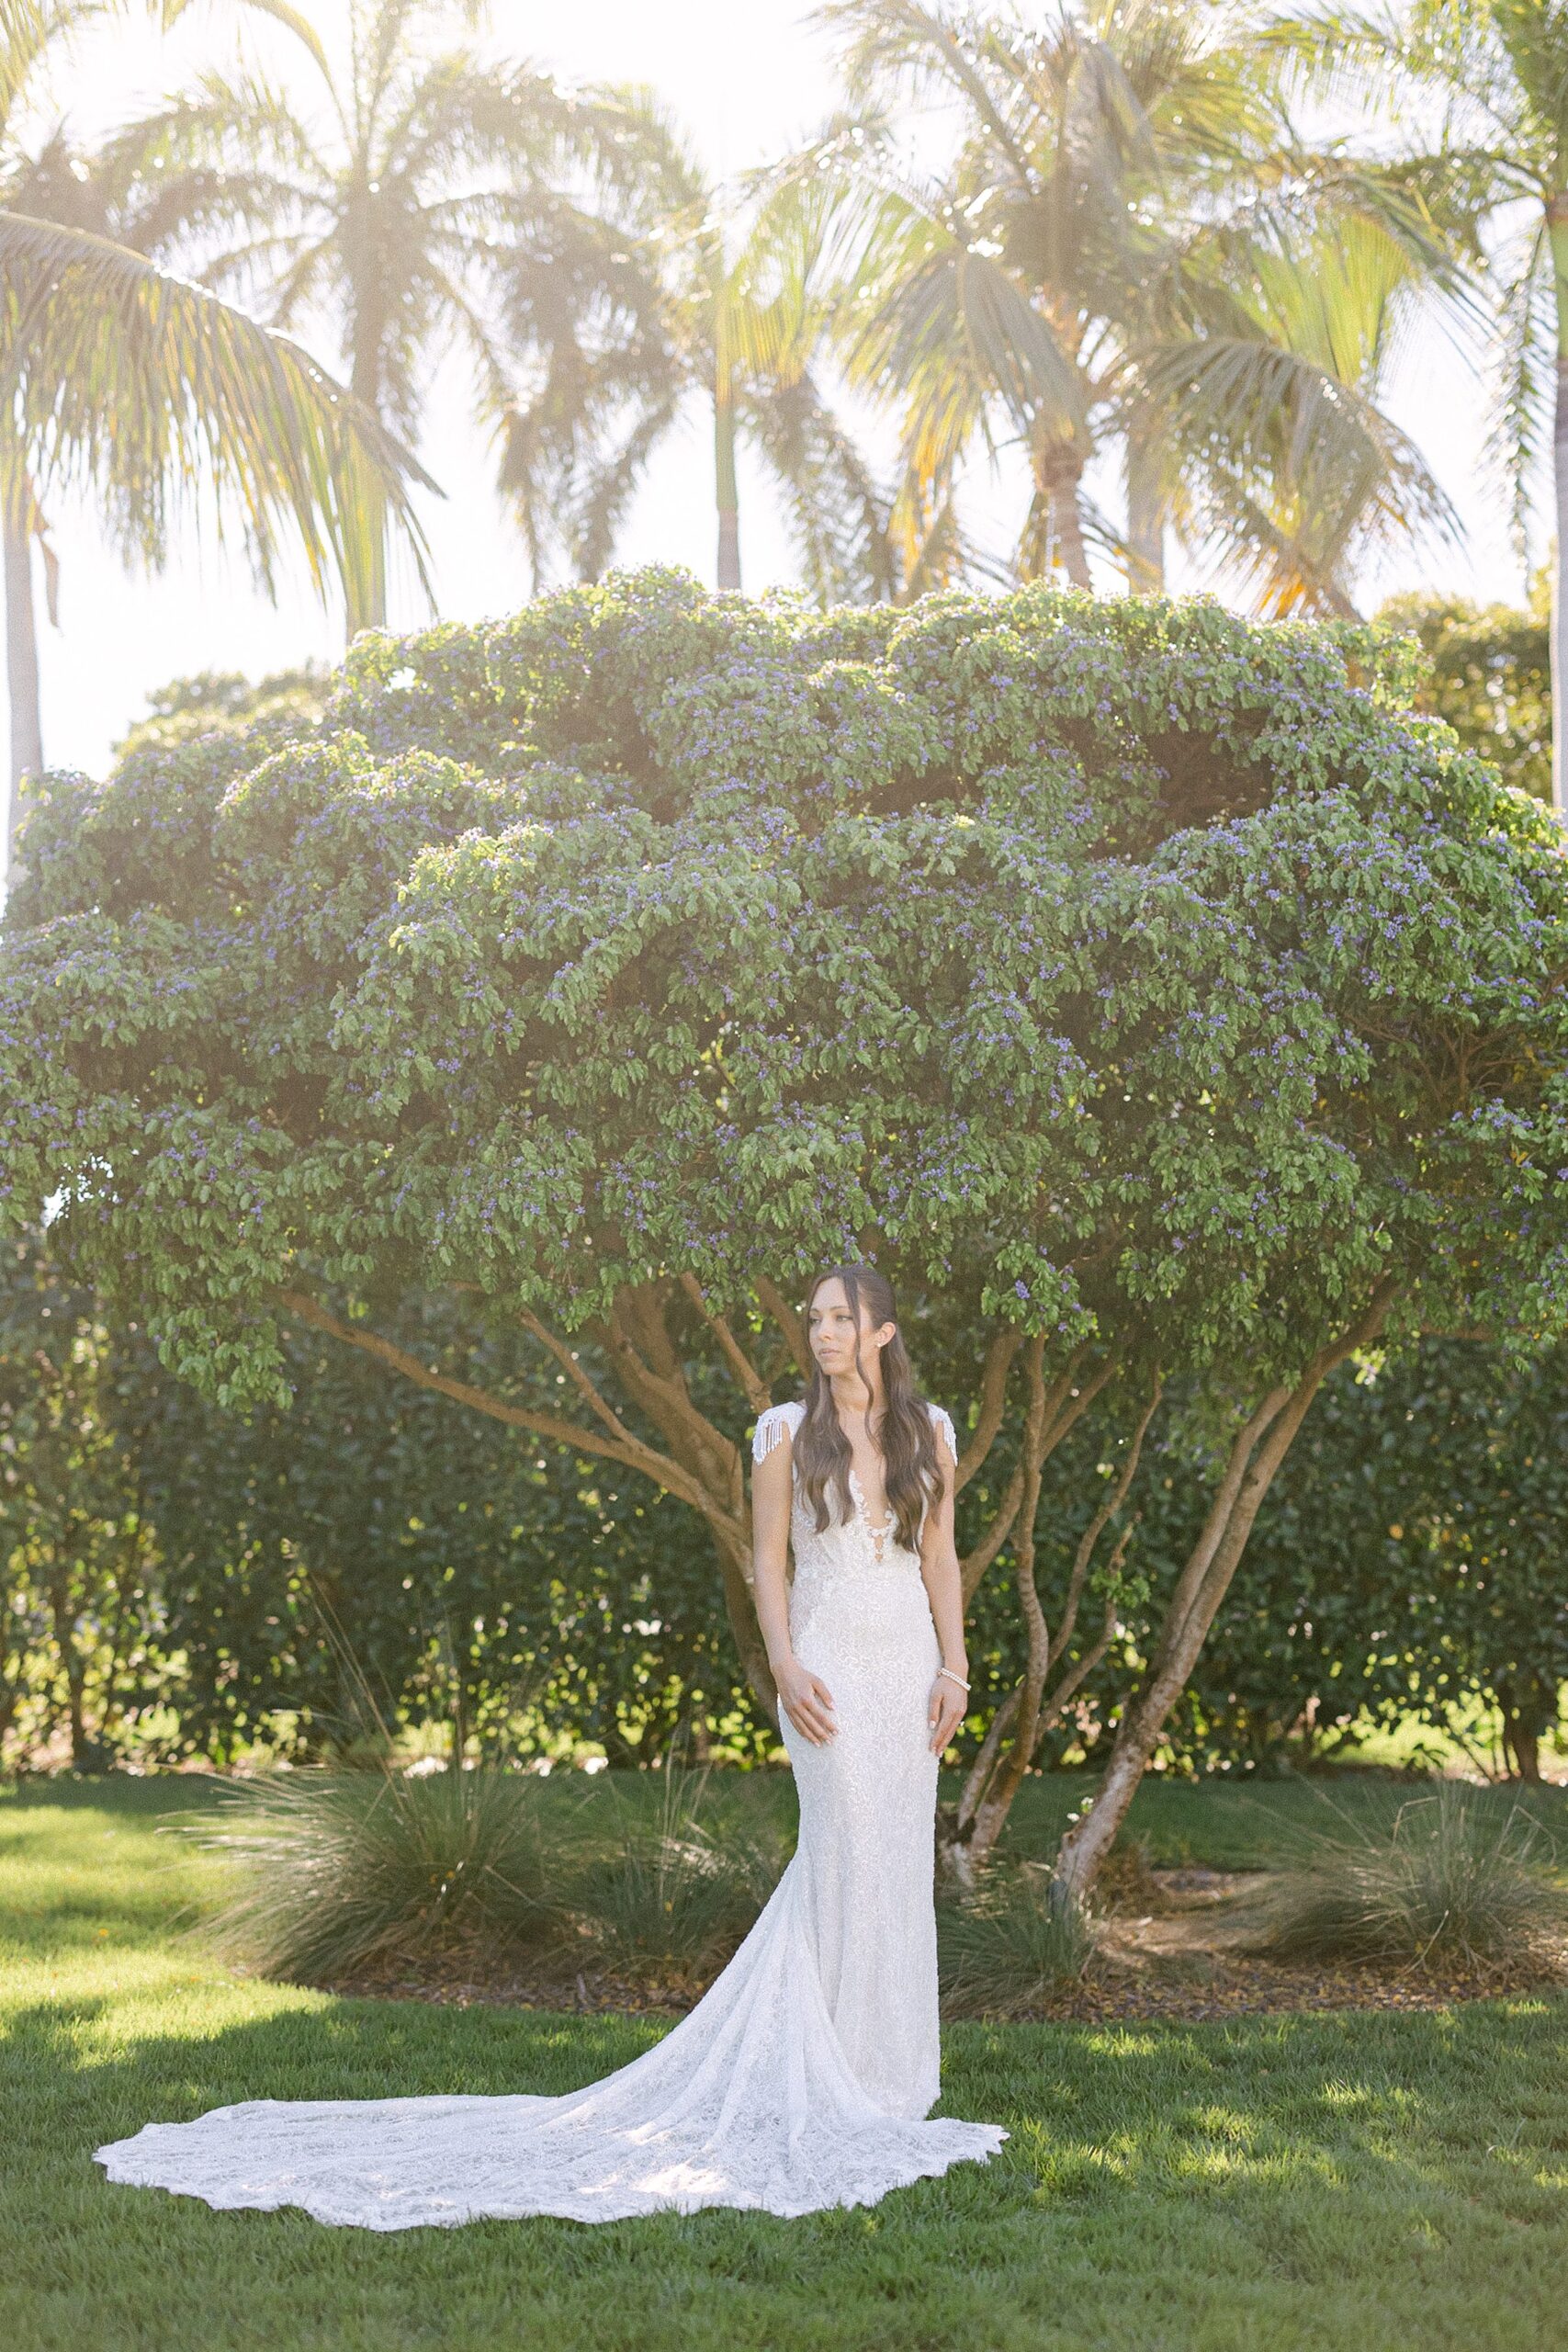 Solo portrait of the bride in front of a purple crape myrtle tree with the golden sun behind her